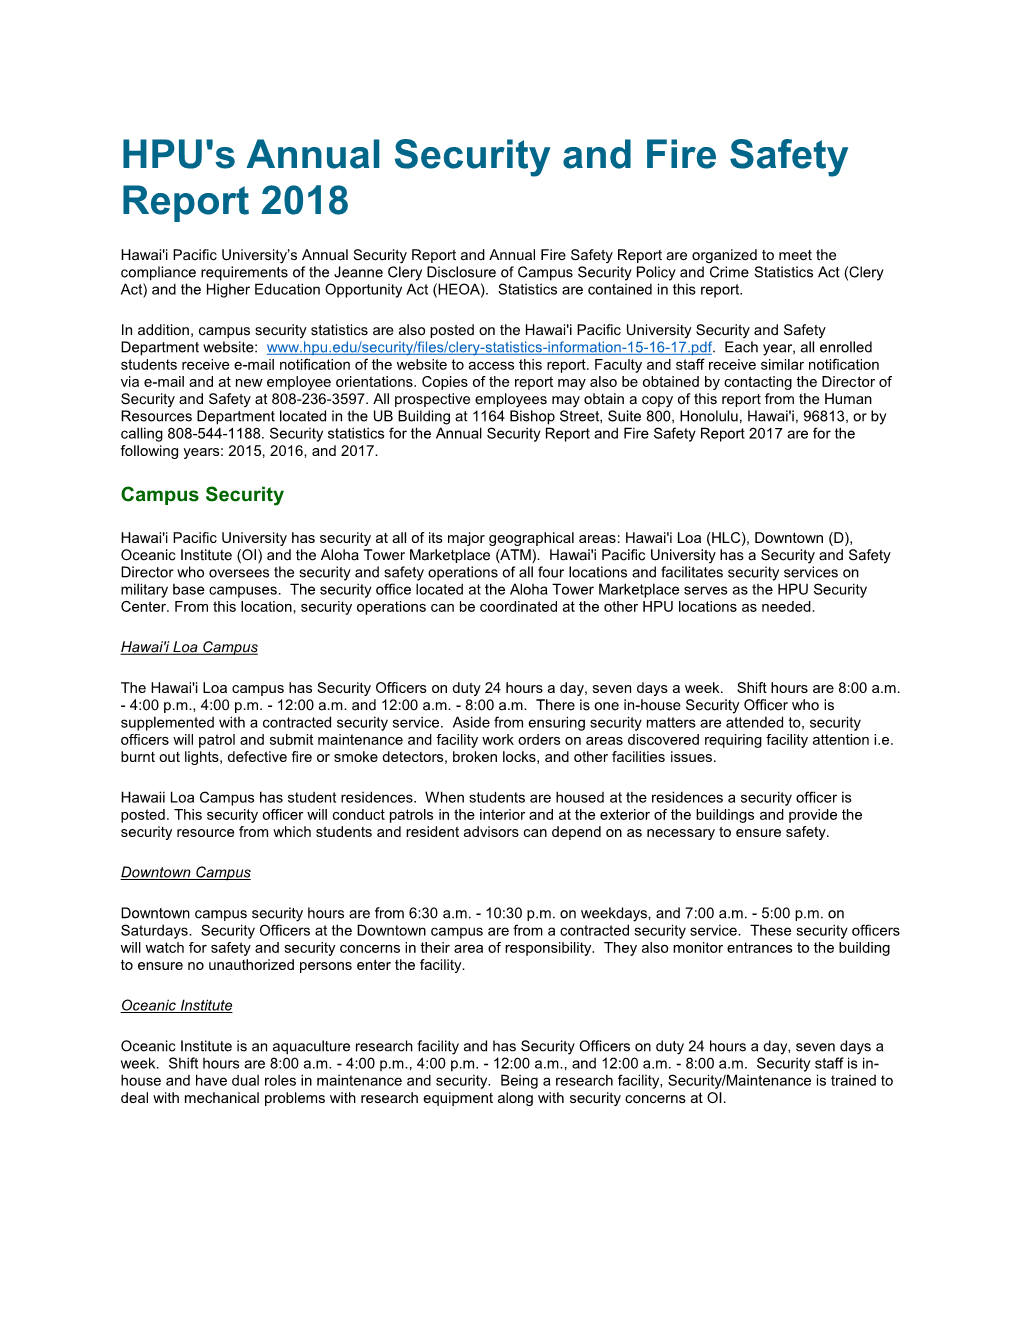 HPU's Annual Security and Fire Safety Report 2018